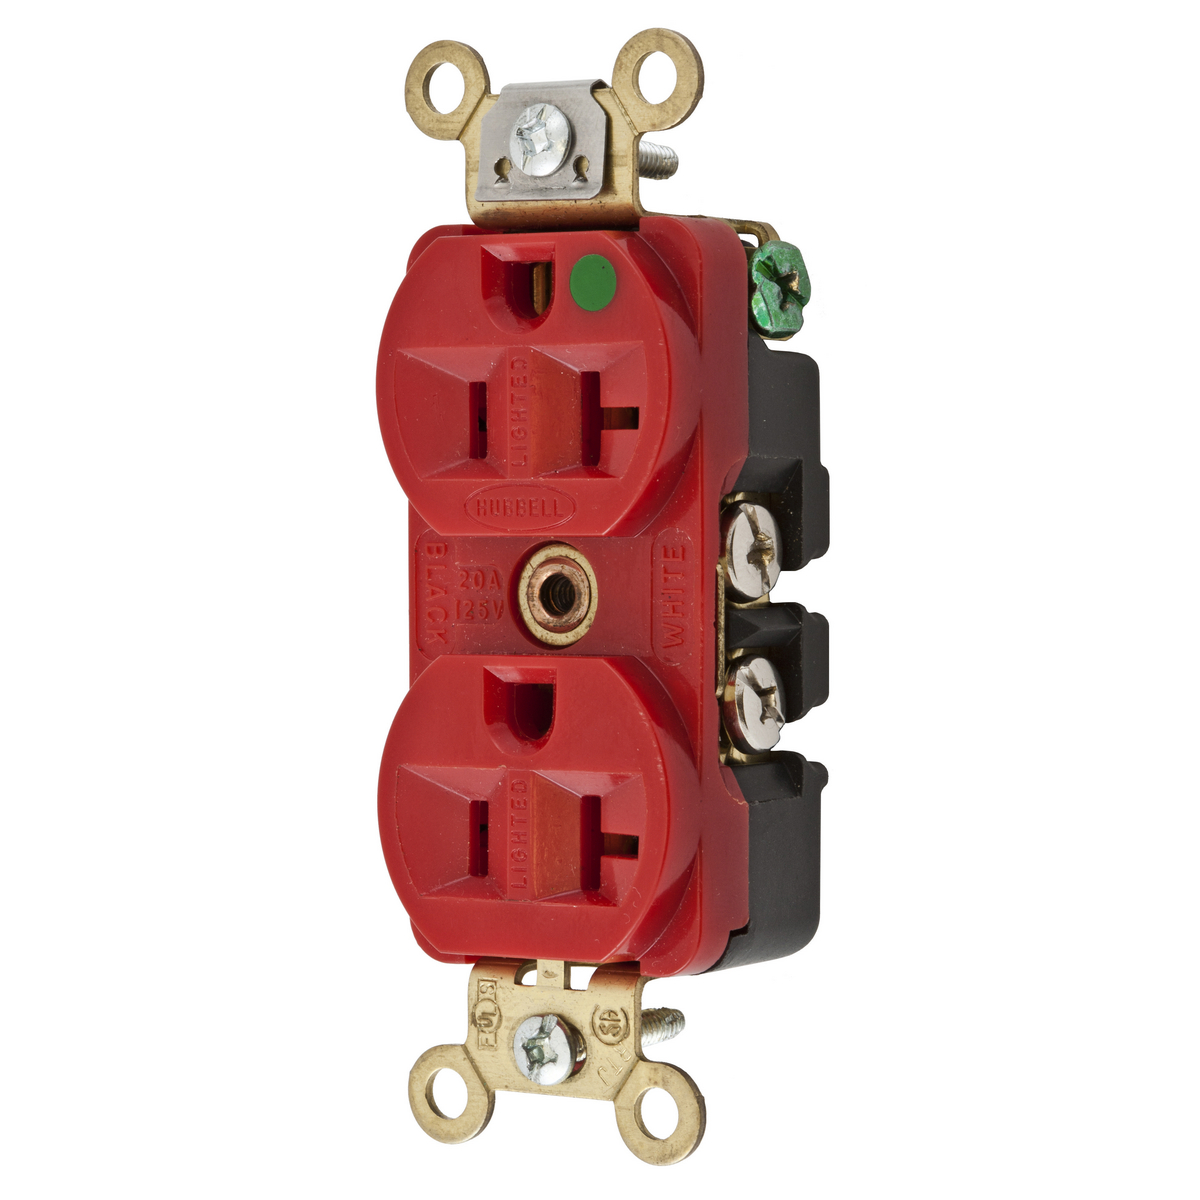 Details about   Hubbell HBL8300R 20 AMP 125V Hospital Grade Duplex Outlet Red W/ Ground Wire NB 